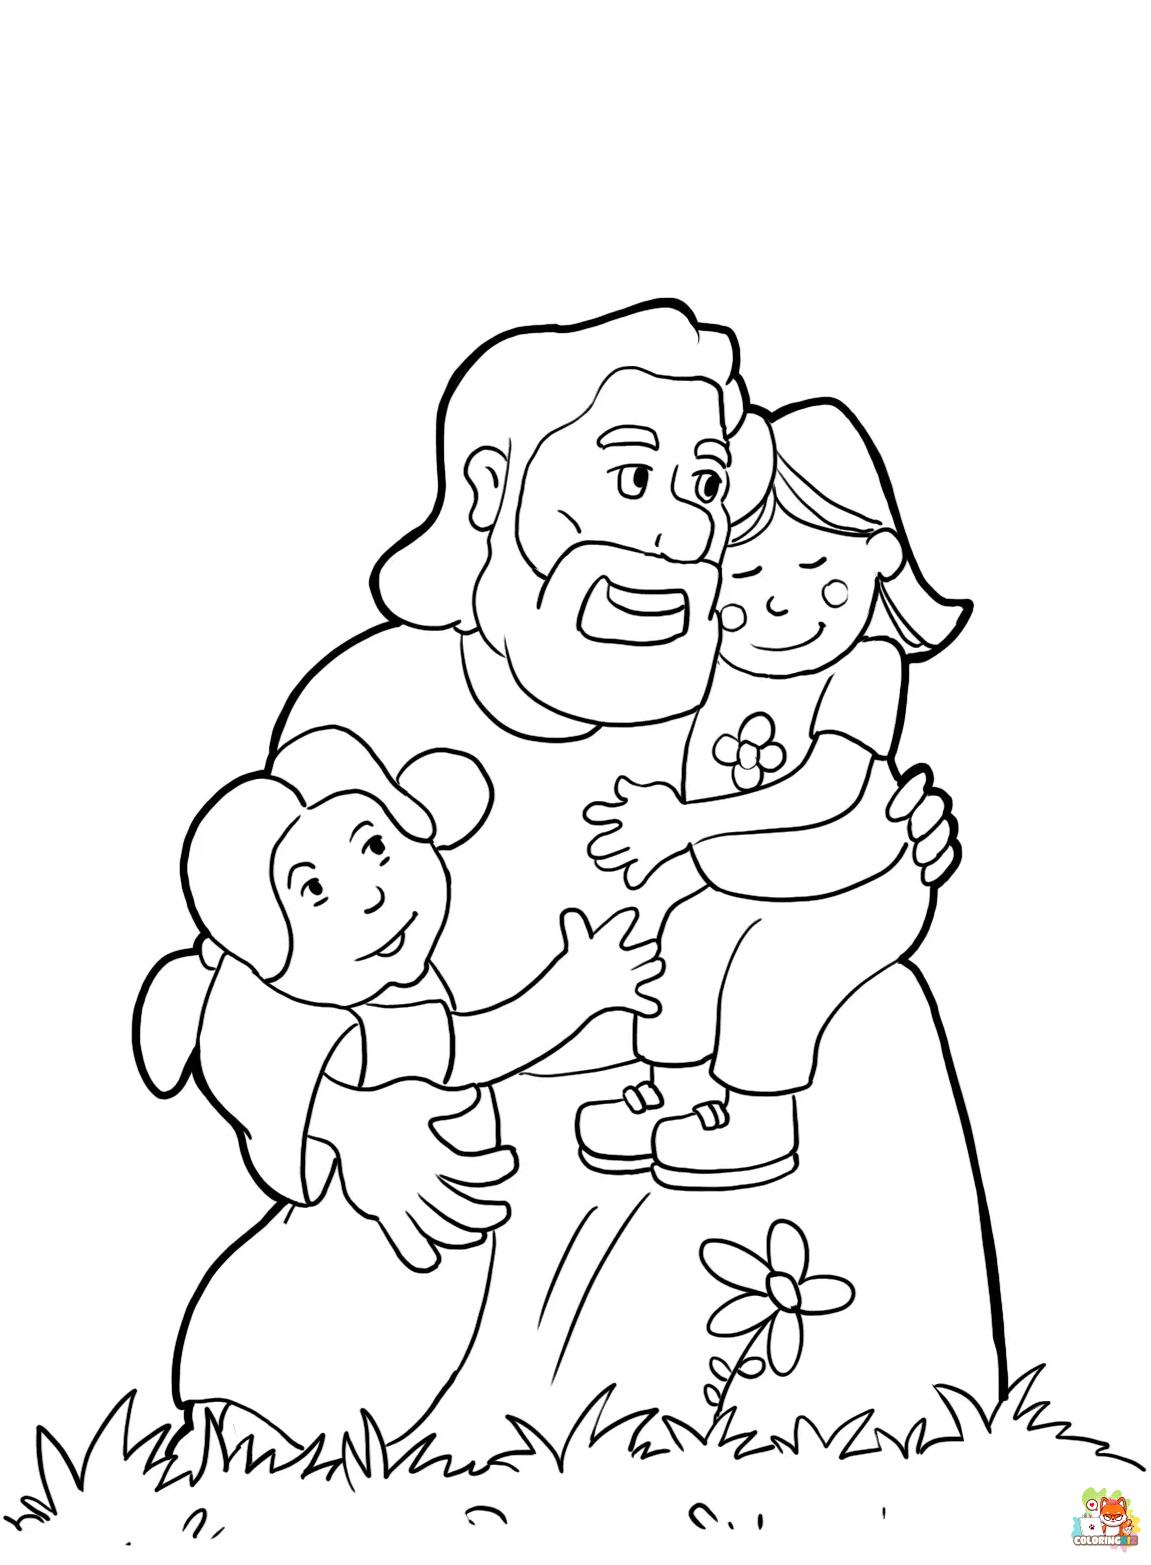 Jesus Loves Me coloring pages printable